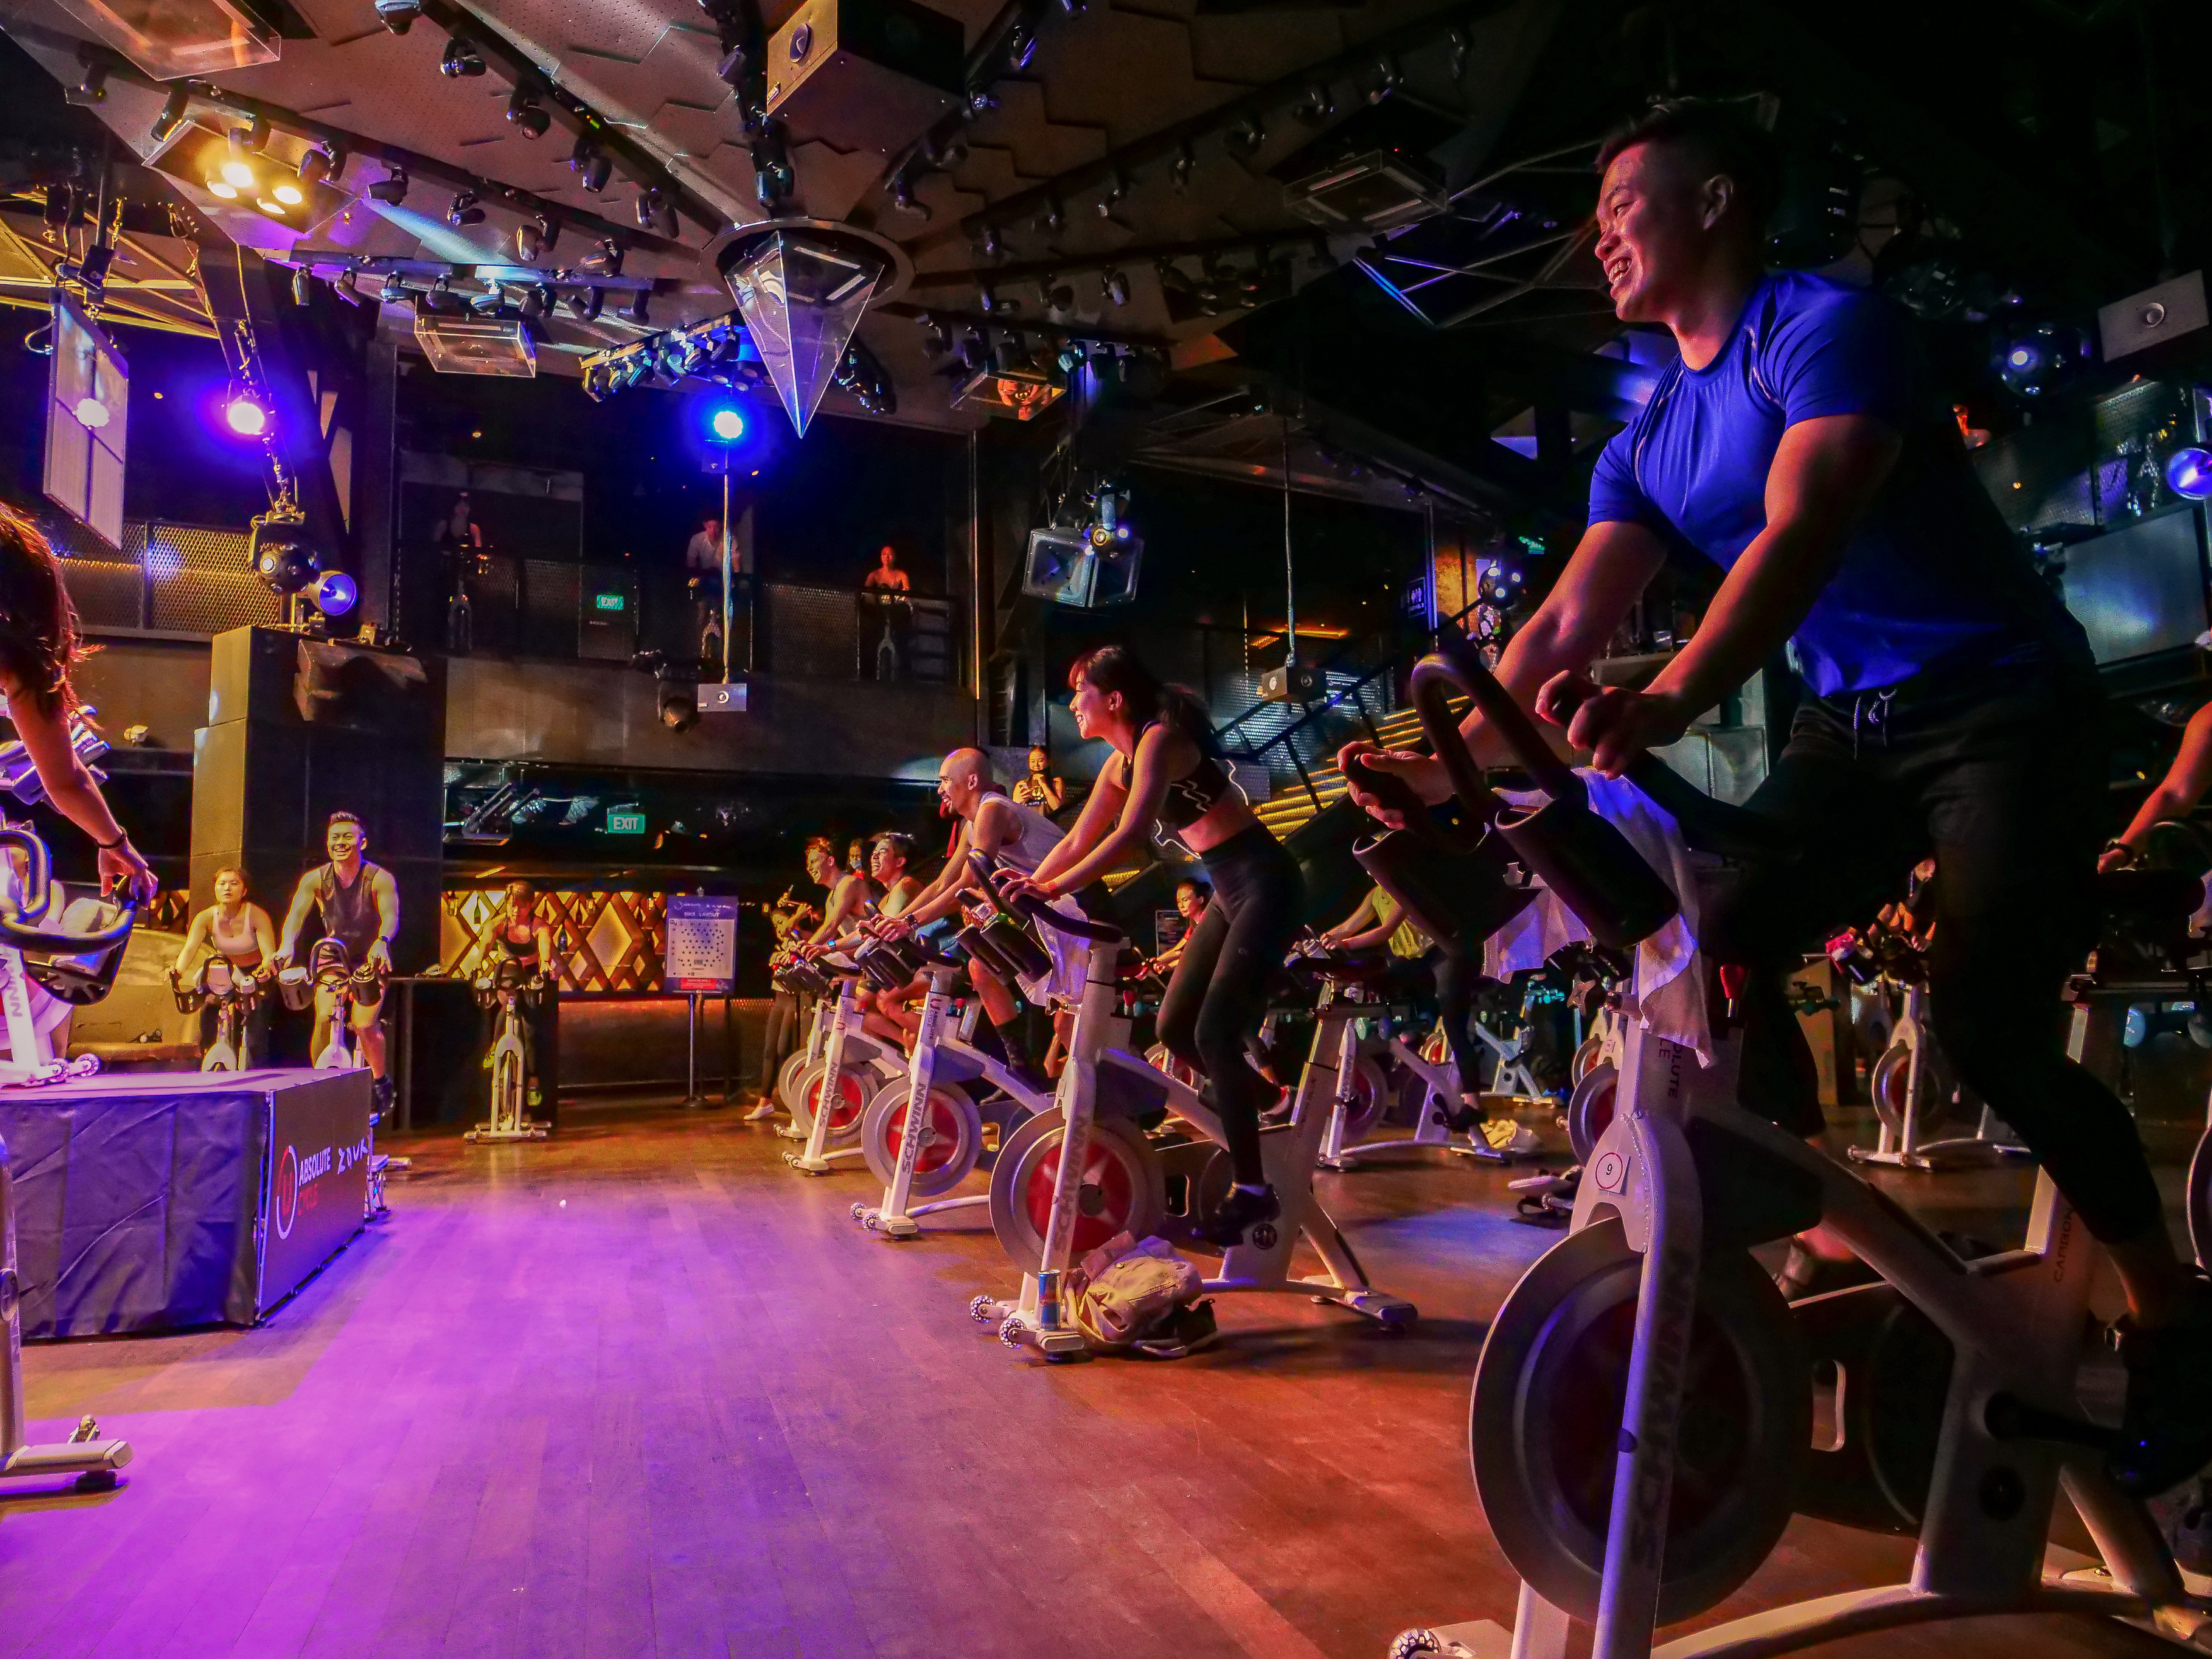 Nightclub Zouk is now a spinning studio by day, and cinema by night